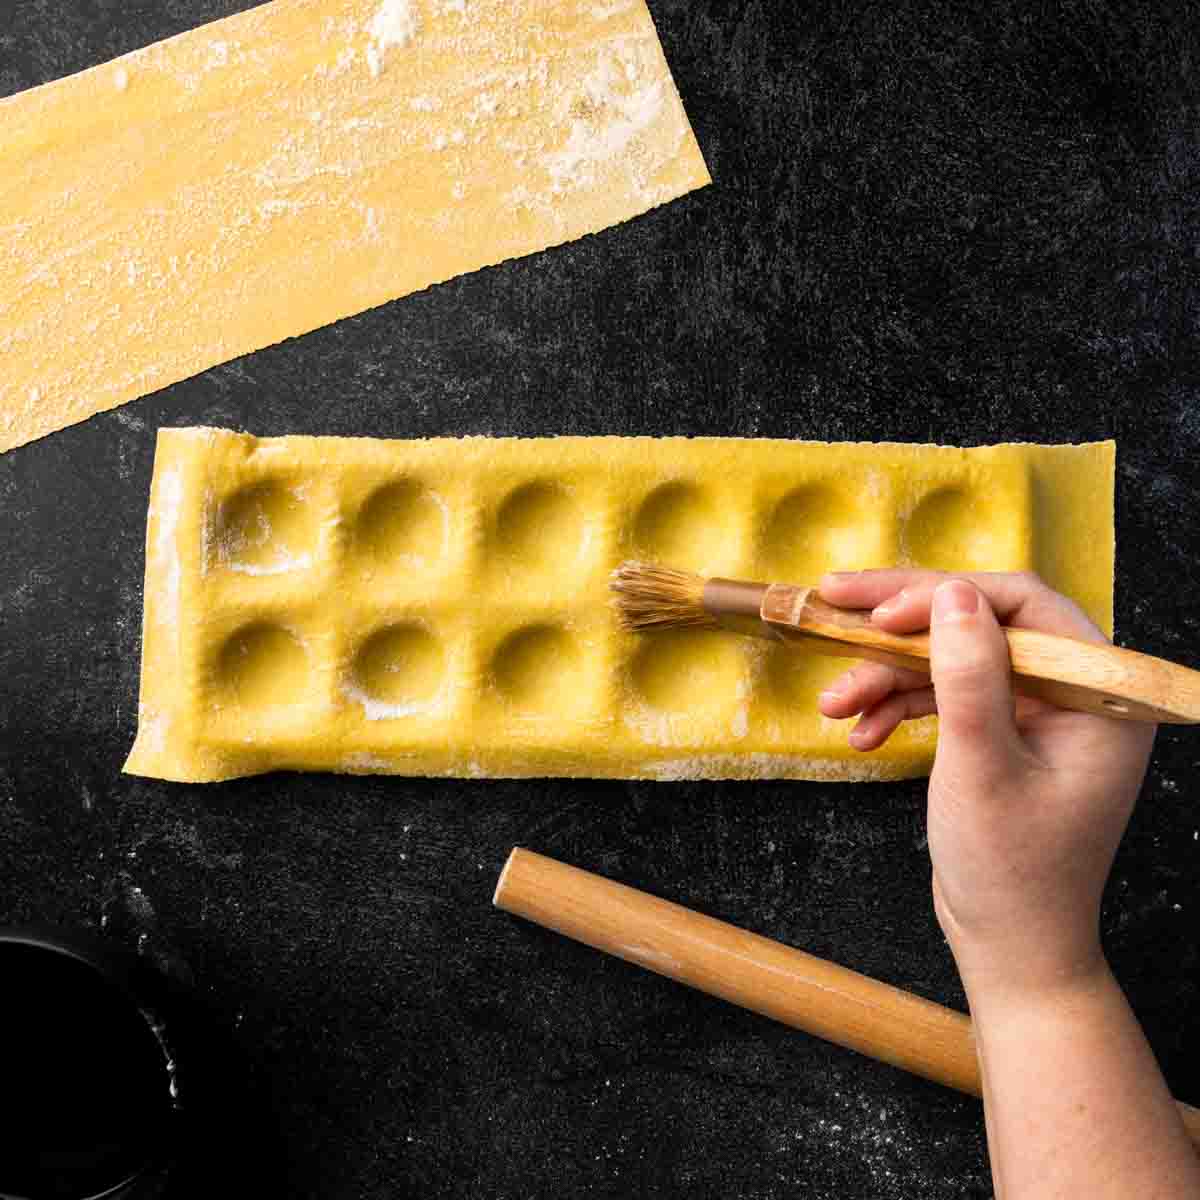 Brushing the edges of the ravioli indentations with a damp pastry brush.